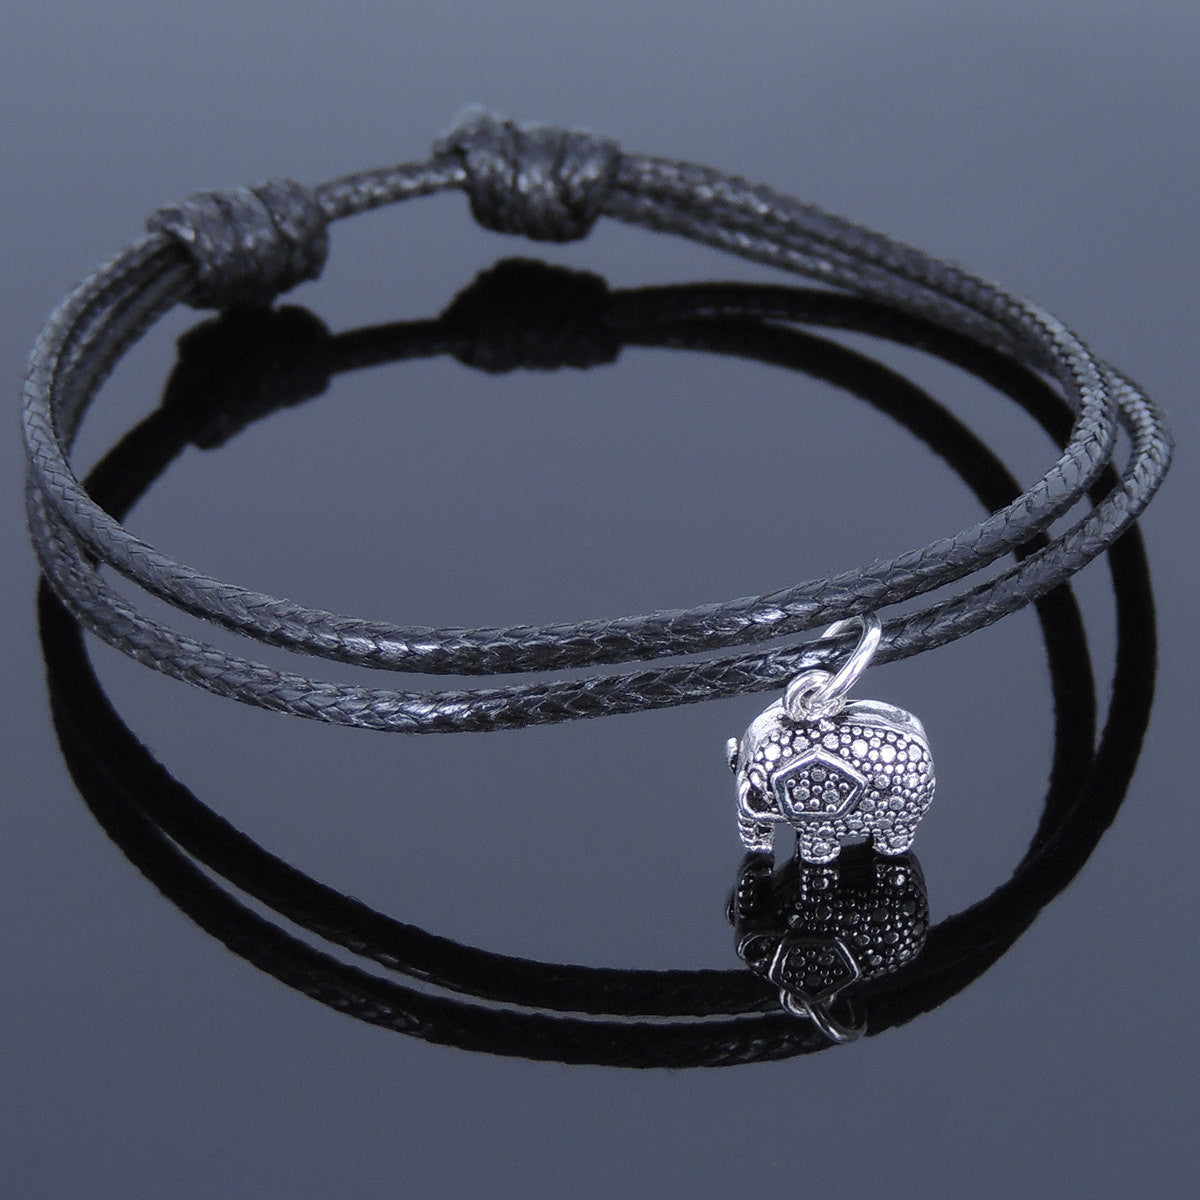 Adjustable Wax Rope Bracelet with S925 Sterling Silver Vintage Elephant Pendant for Positive Healing Energy - Handmade by Gem & Silver BR524